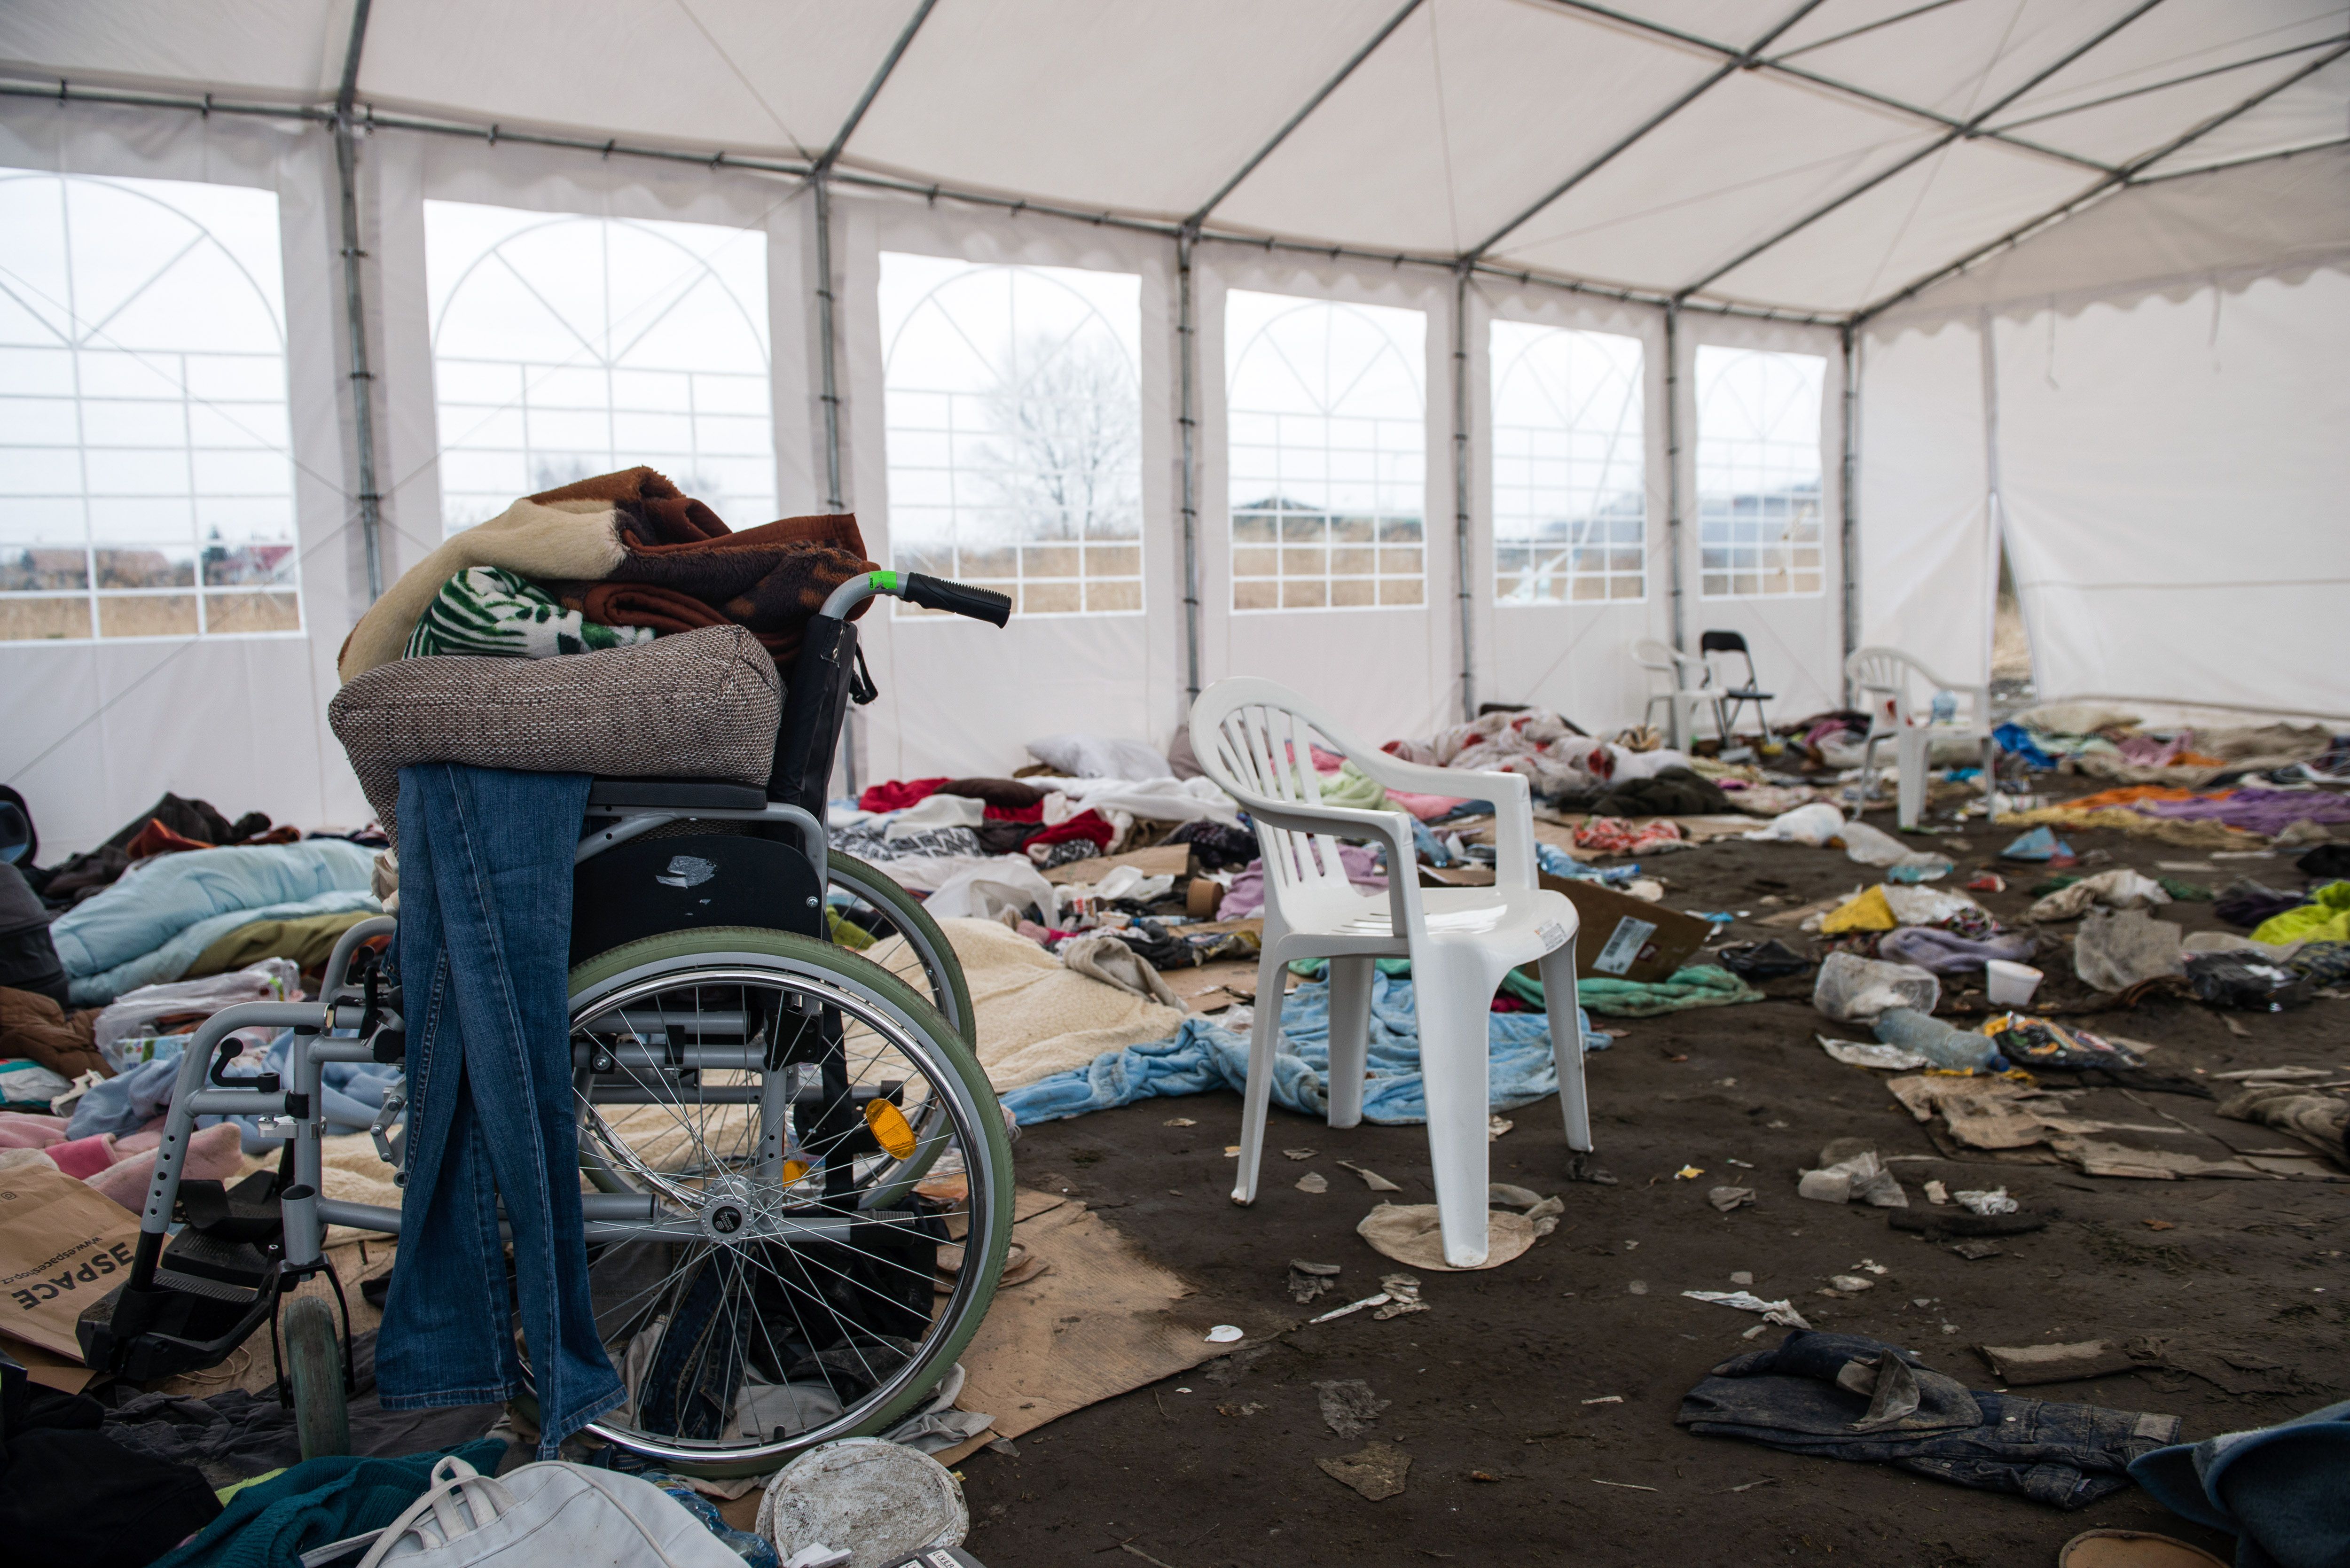 Photo of a space littered with clothes bedding and a wheelchair